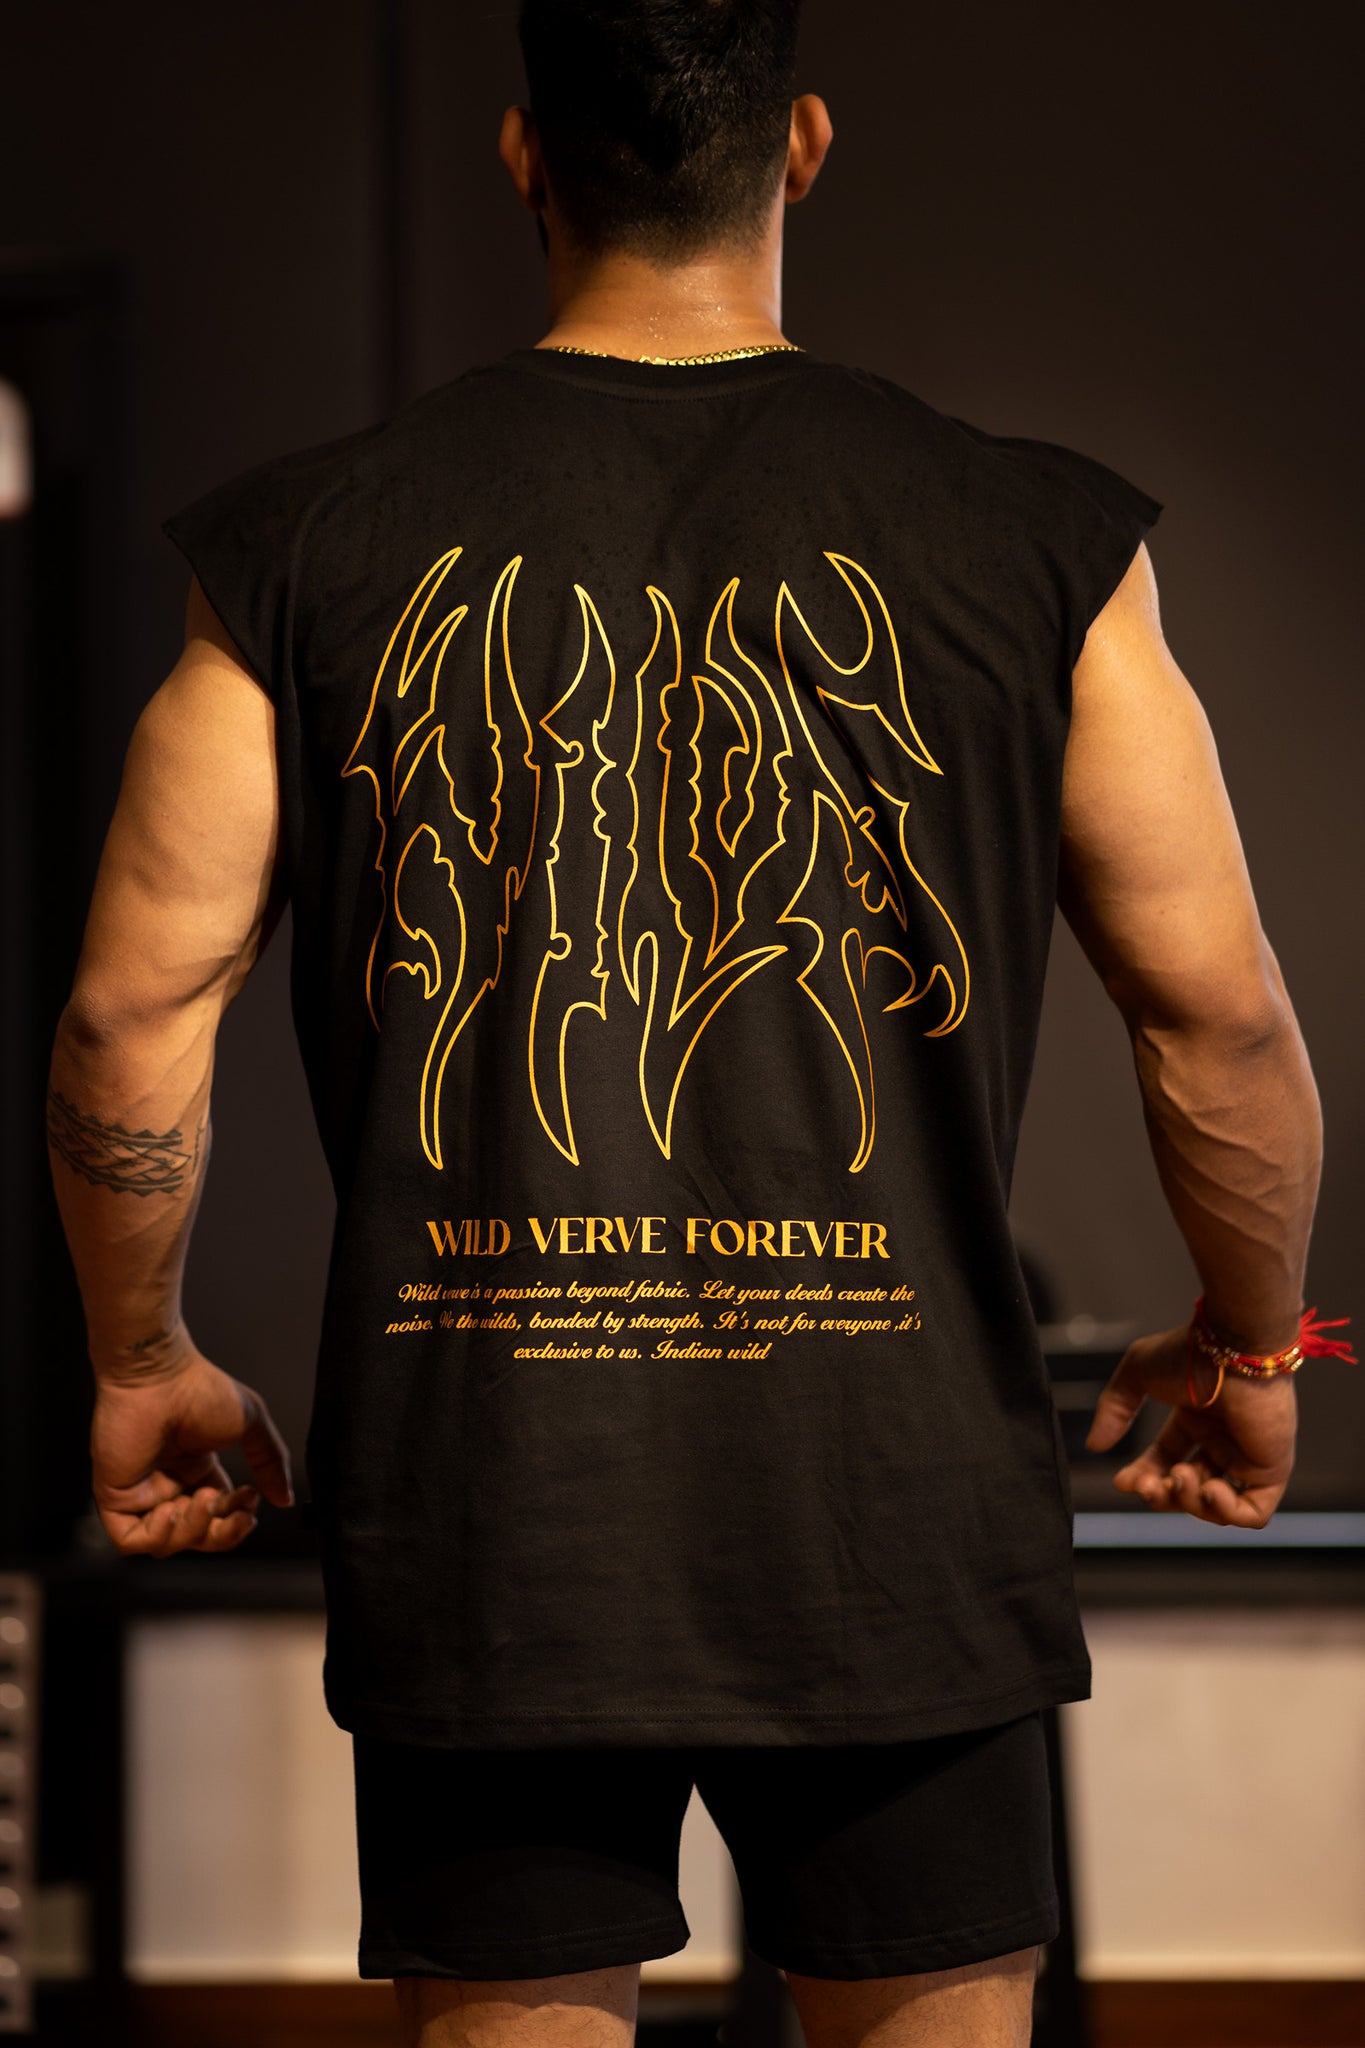 WILDS FLAME "PREMIUM" MUSCLE TEE IN BLACK (GOLD PRINT)